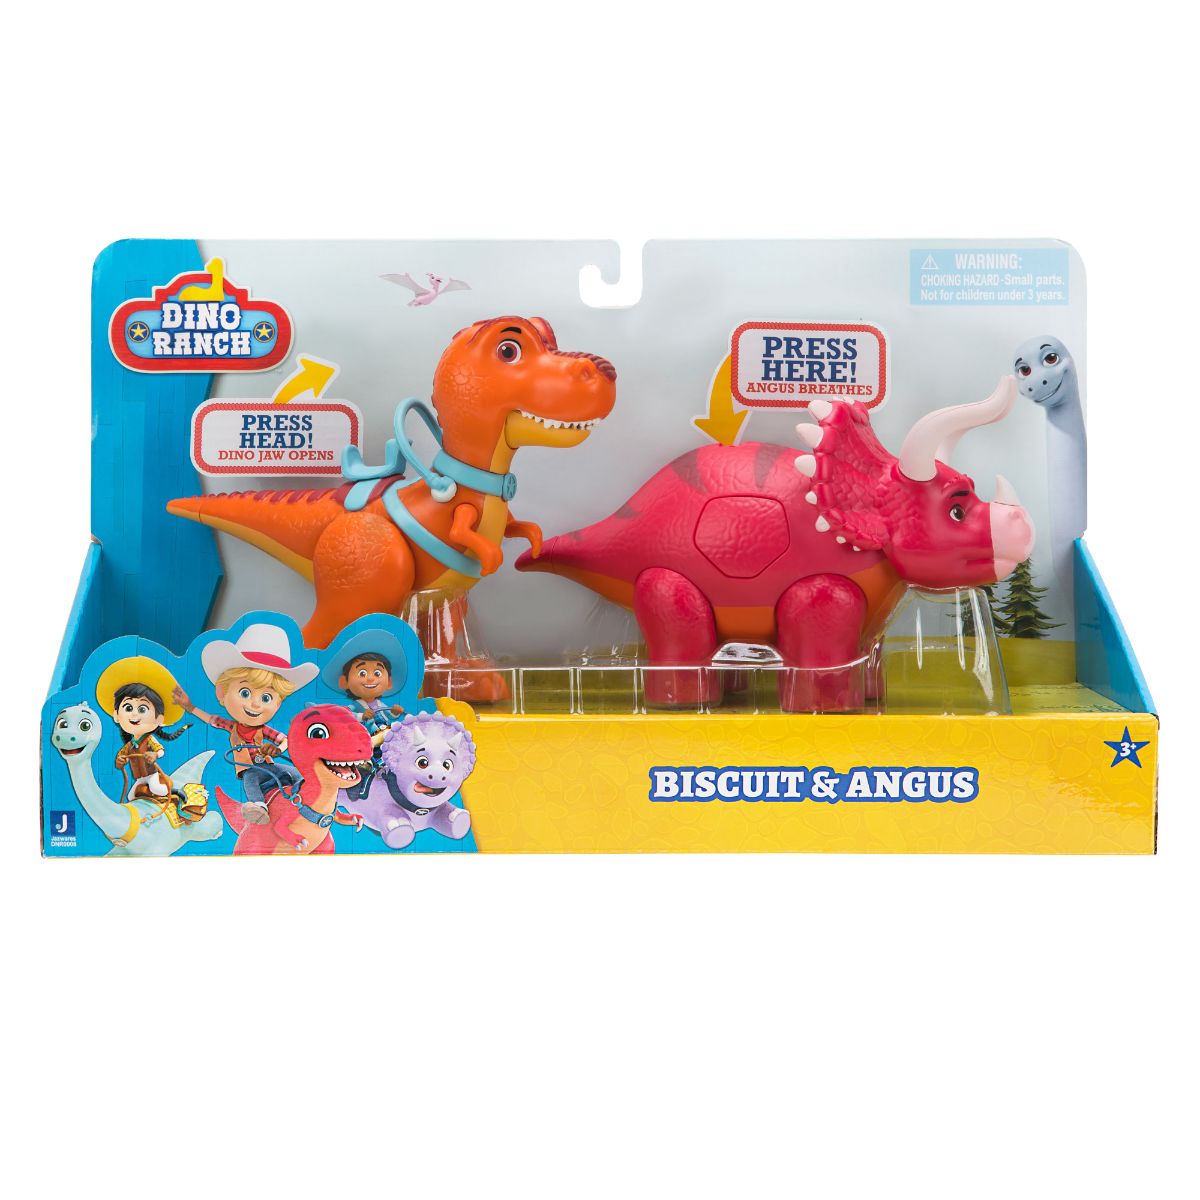 Set 2 dinozauri, Biscuit si Angus, Dino Ranch, Deluxe Dino Pack, DNR0008 Angus imagine 2022 protejamcopilaria.ro